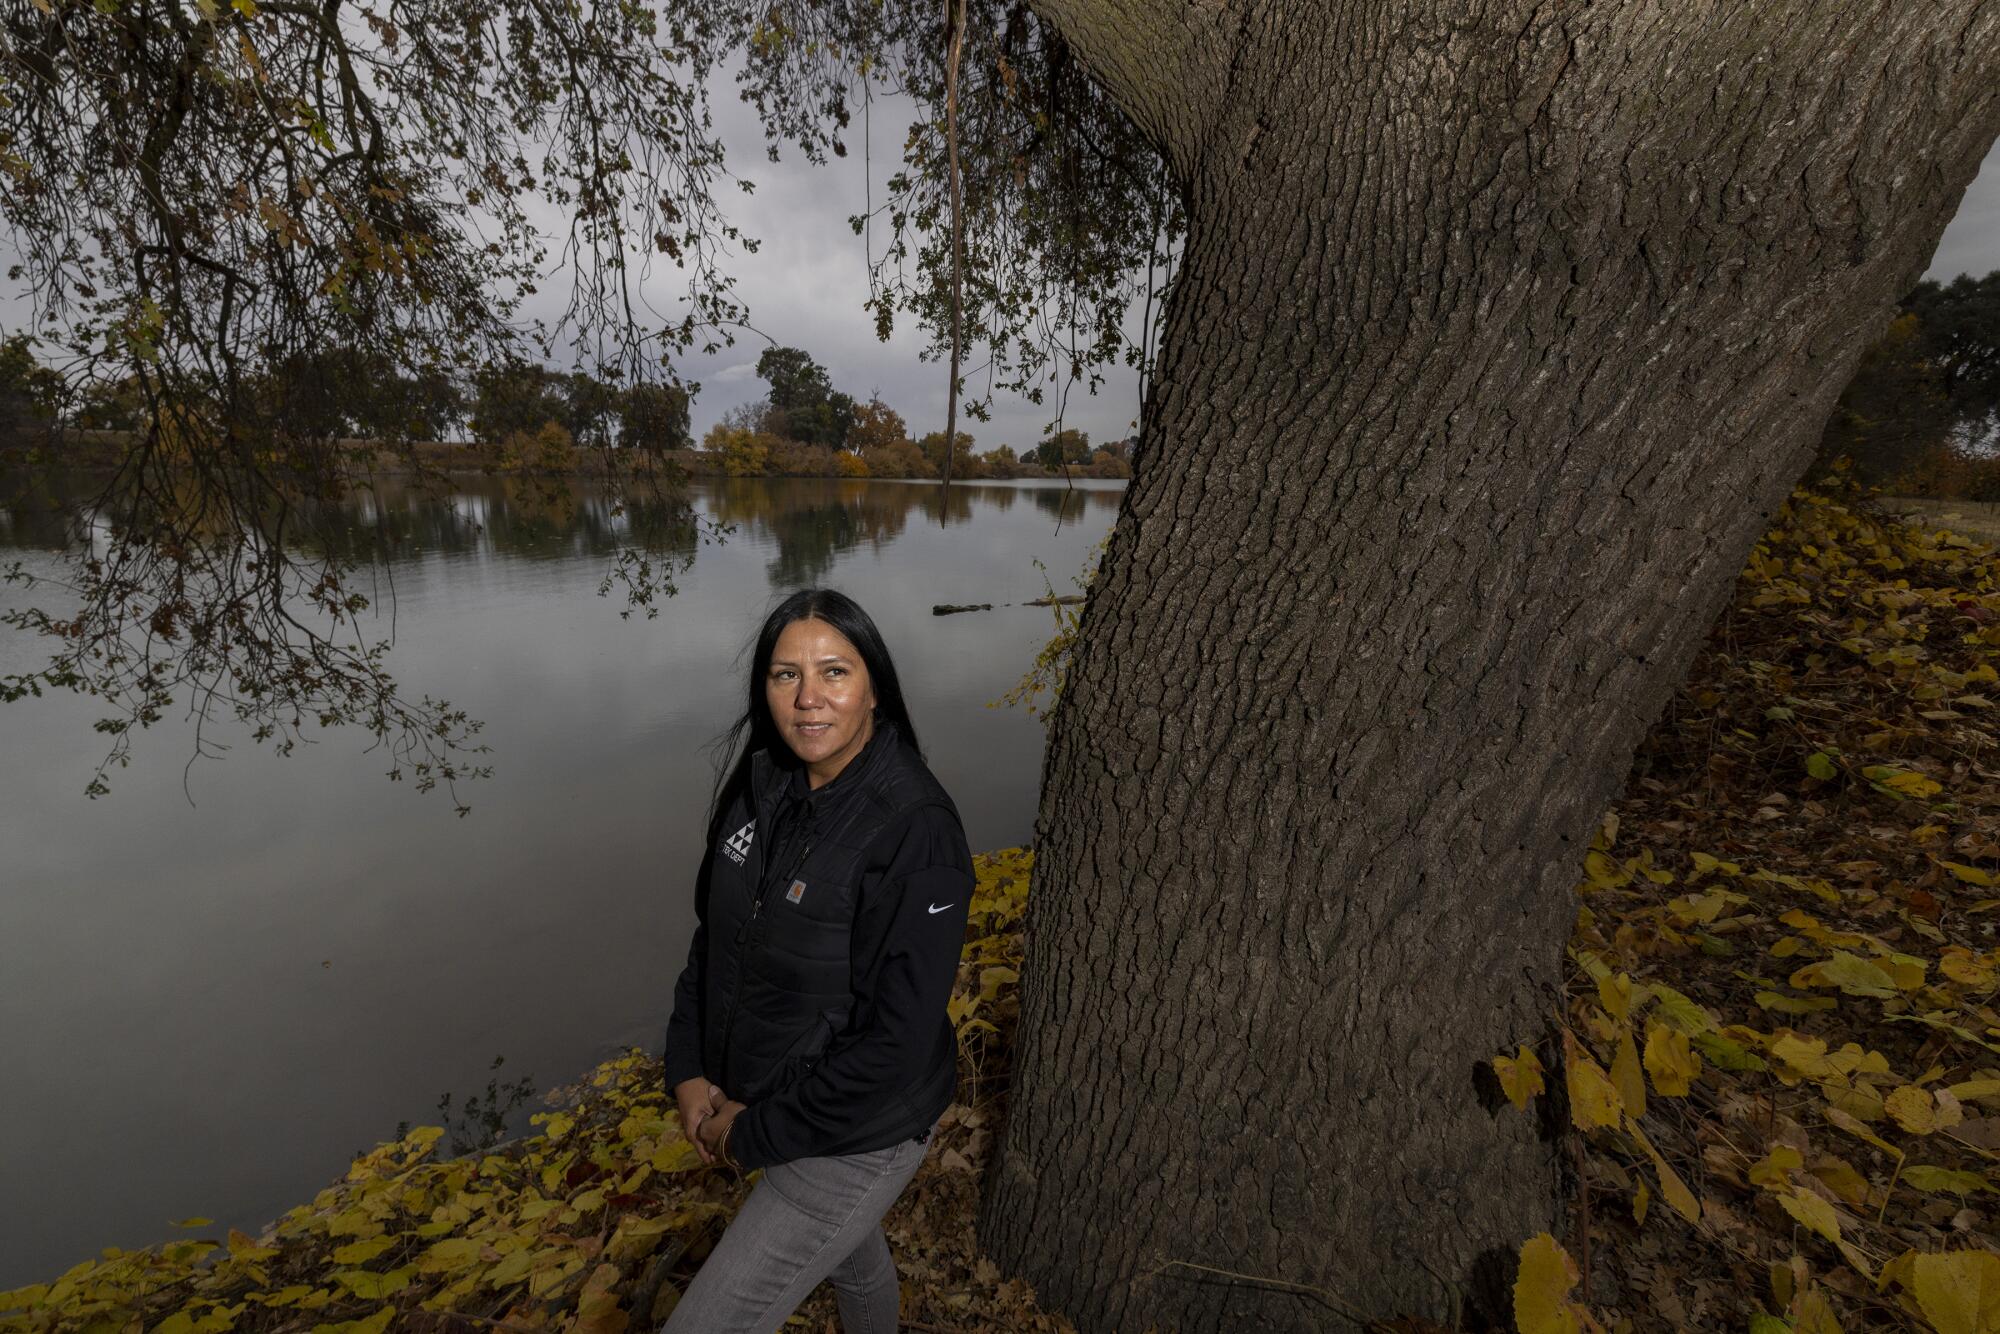 A woman stands next to a tree along a river.